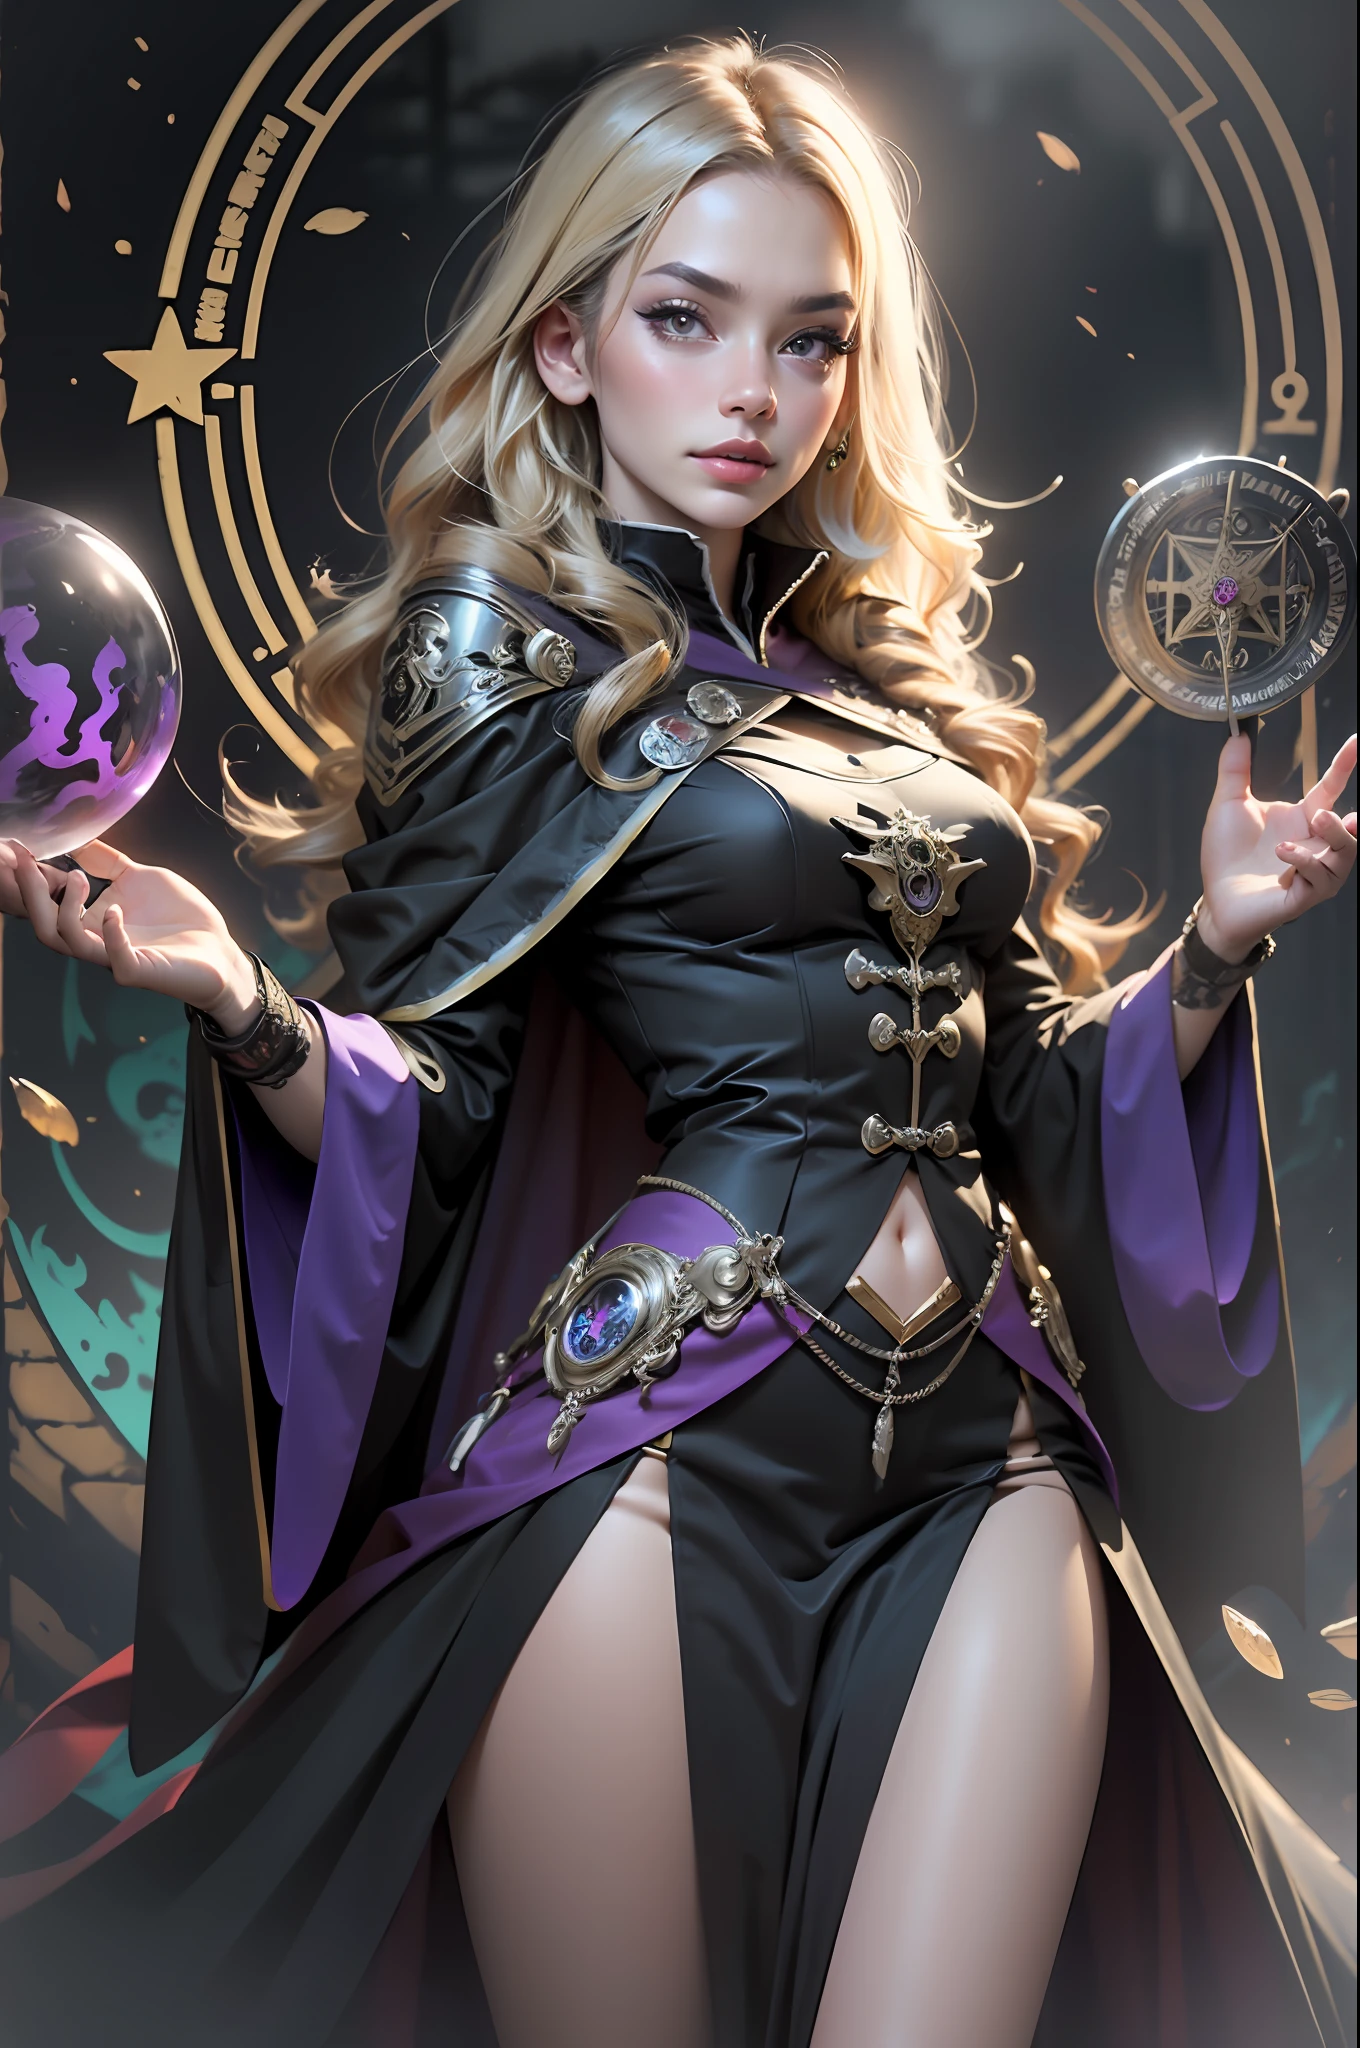 (((extremely detailed face))),(((best quality)))1 woman, 8k, a beautiful blonde sorceress in black clothing, black cape with purple details and high boot, standing on a platform, ((standing and front)), looking at the viewer, (extremely intricate robes, magic robes), more detail in the magic circle in the background, magic circle, casting a spell,  black aura,costume cloak, spell pose, female wizard conjuring a spell, magic, purple and black, night, purple star talisman, pores detailed, arms open